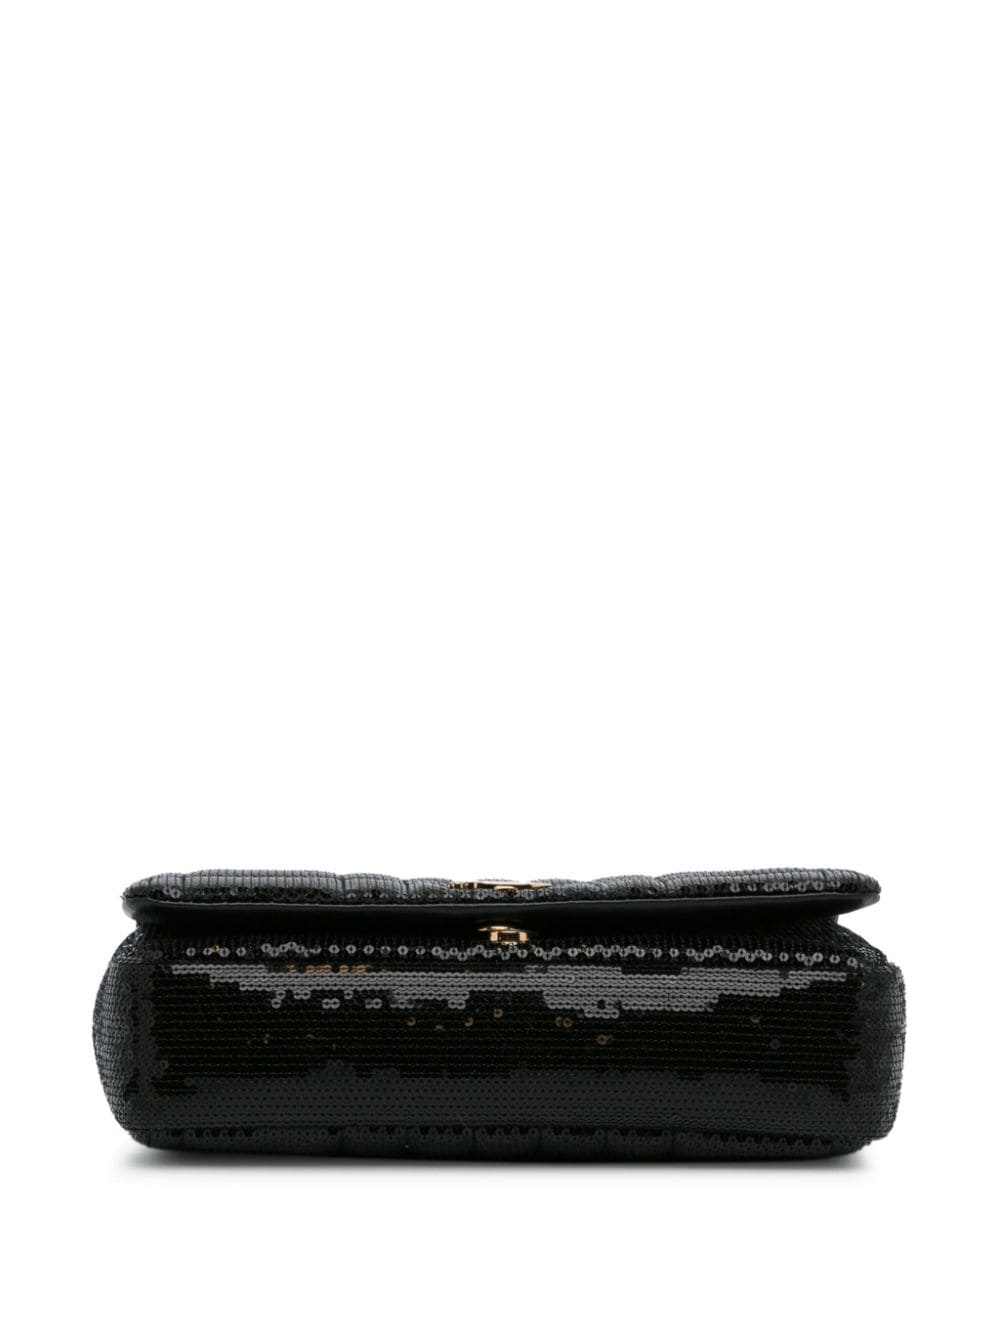 Pre-owned Burberry 2010-2022 Small Lola Sequin Shoulder Bag In Black